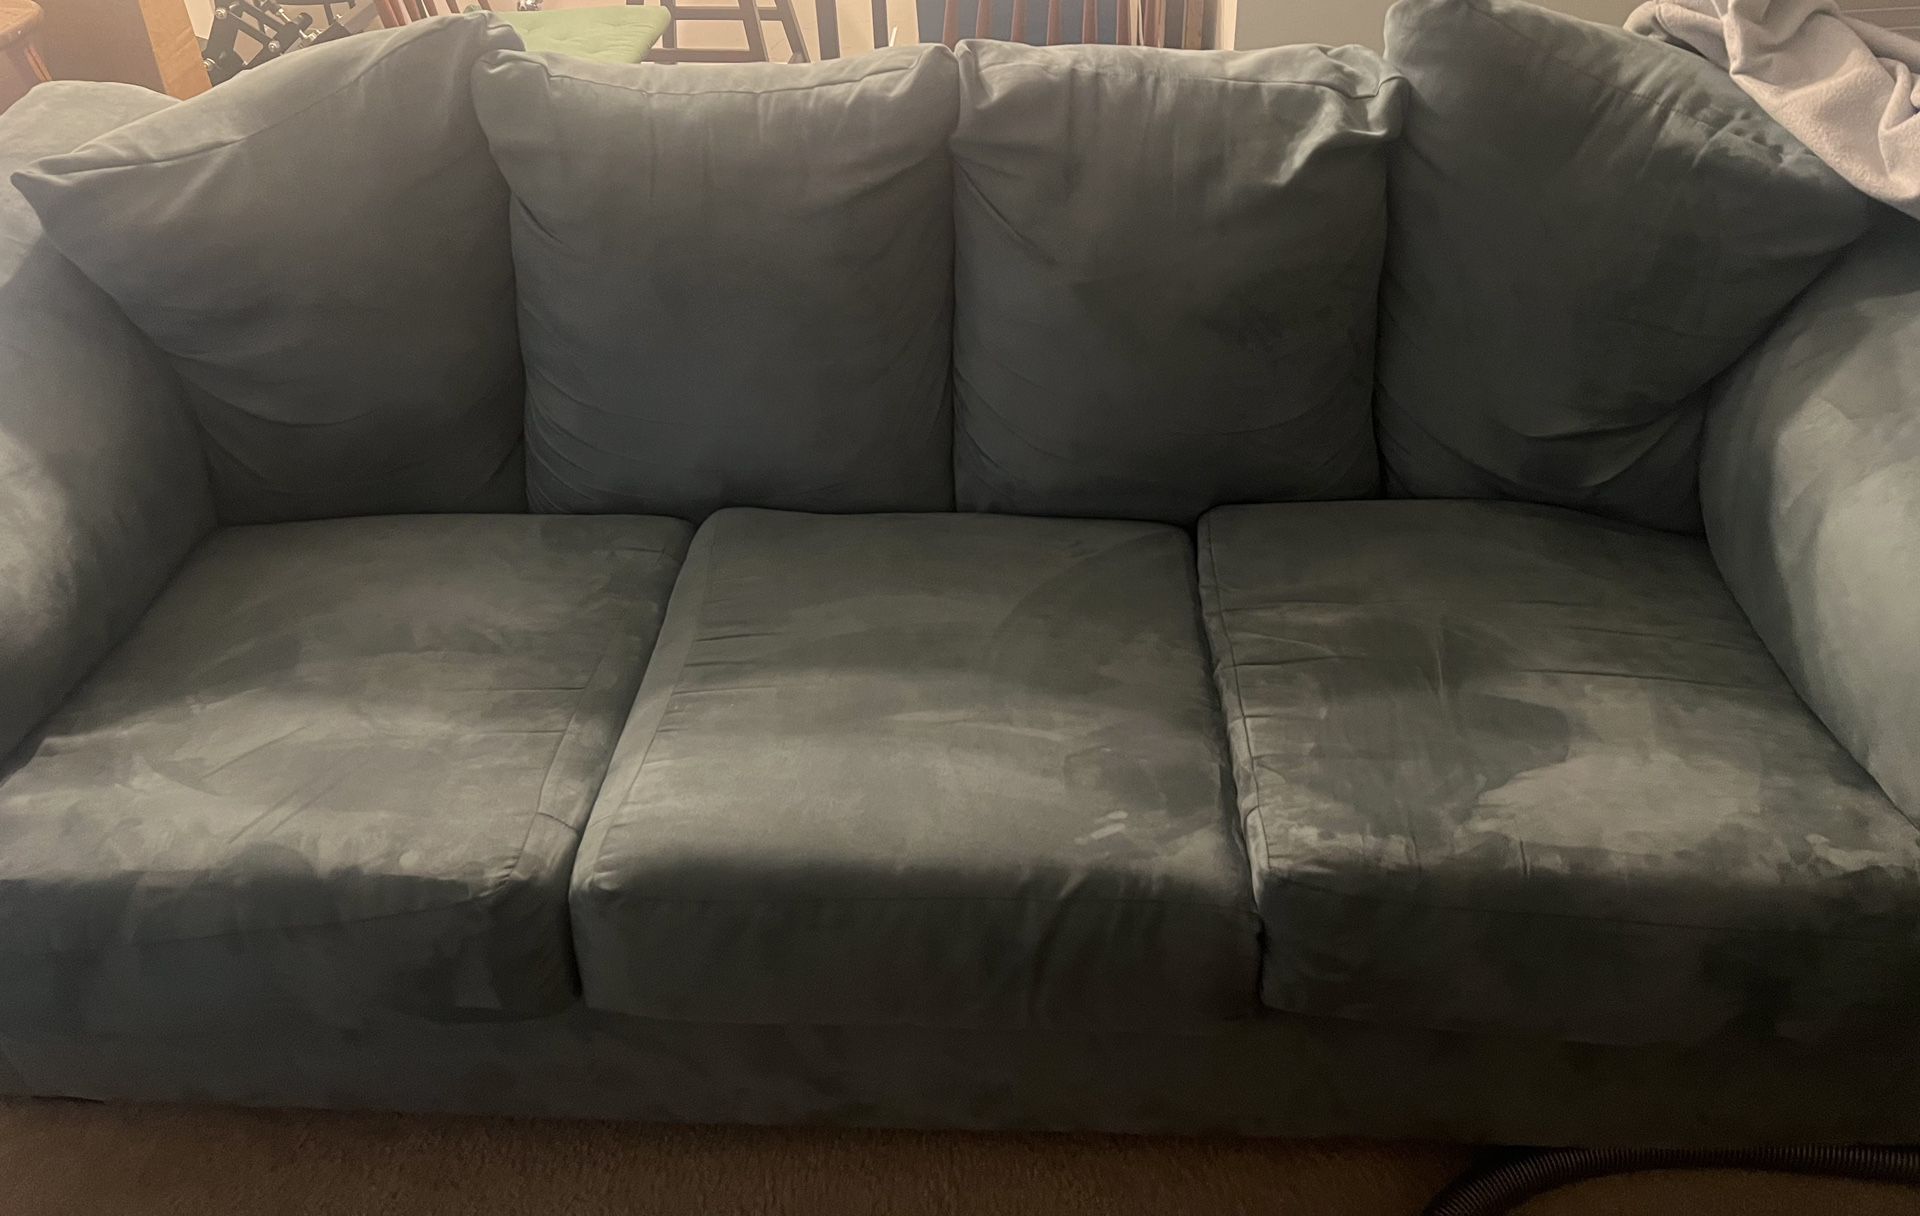 Complete Living Room Set - Sofas, Ottoman, and Accent Chair (Local Pickup Only)